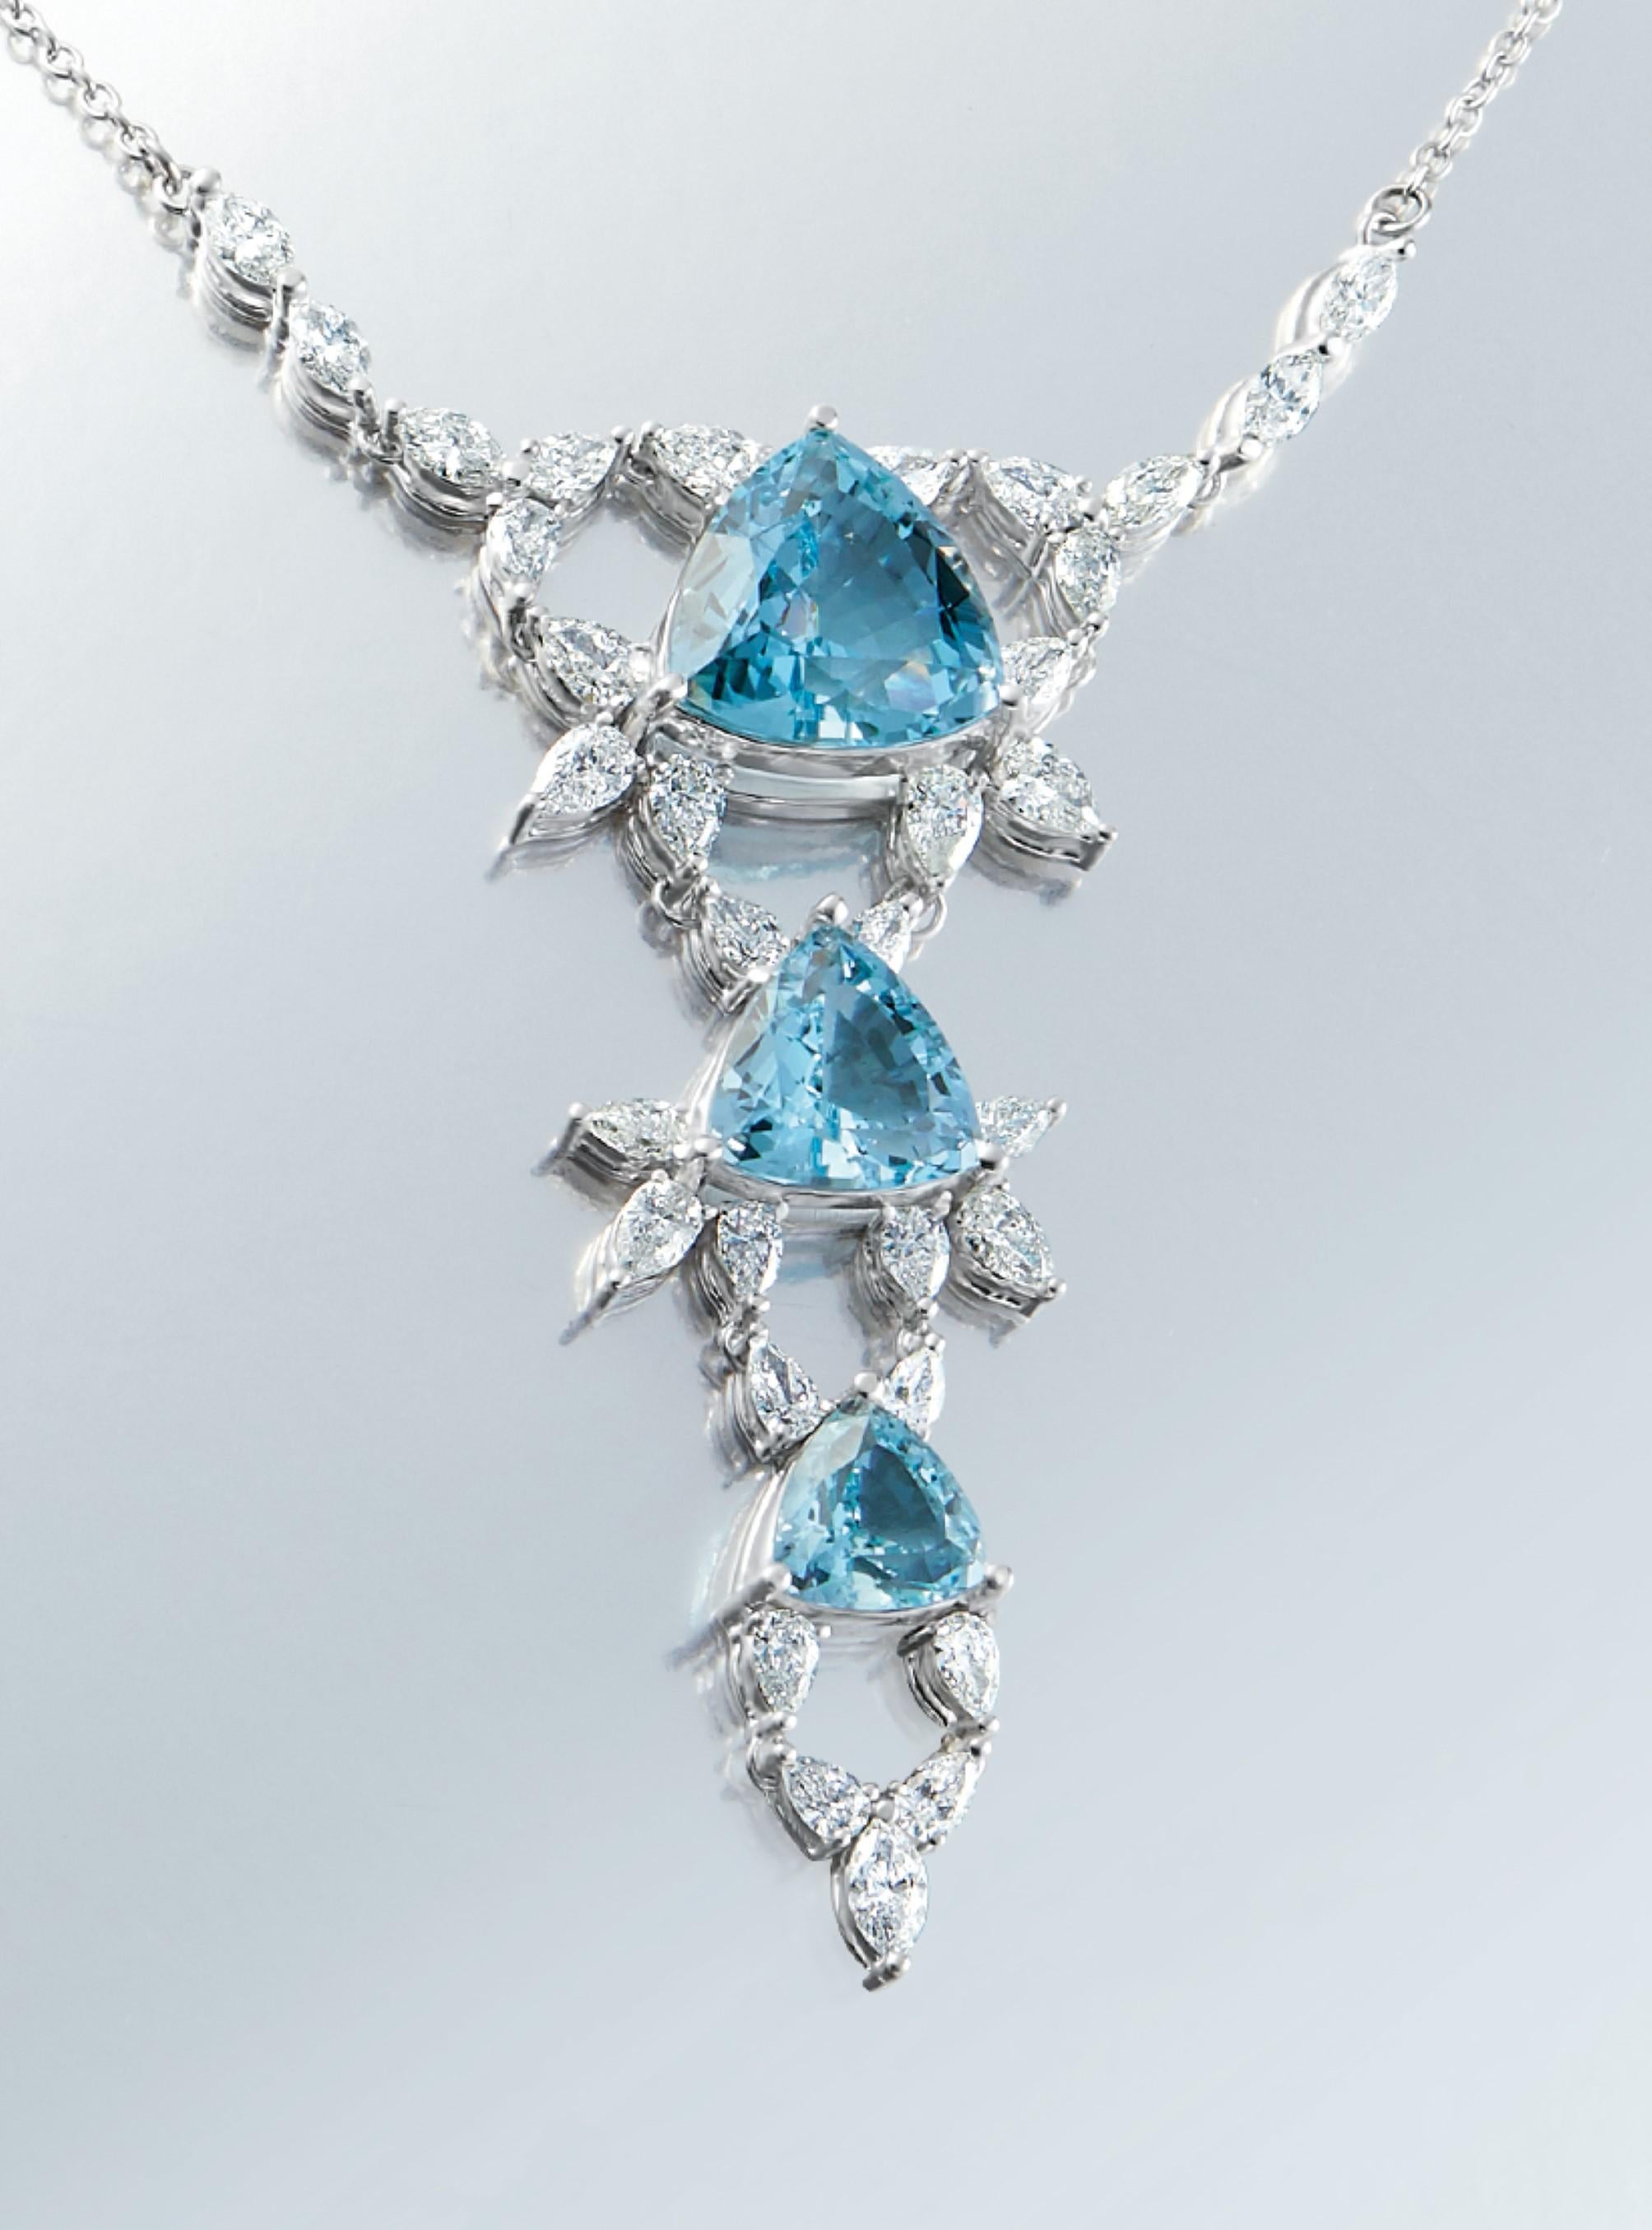 Beautiful set of aquamarine and diamond Necklace and earrings set in 18K white gold.  Includes almost 19 carats of fine aquamarines and 6.61 total carat wait of white diamonds. 
Necklace: 13.77tcw aquamarine, 3.70tcw diamond
Earrings: 5.21tcw